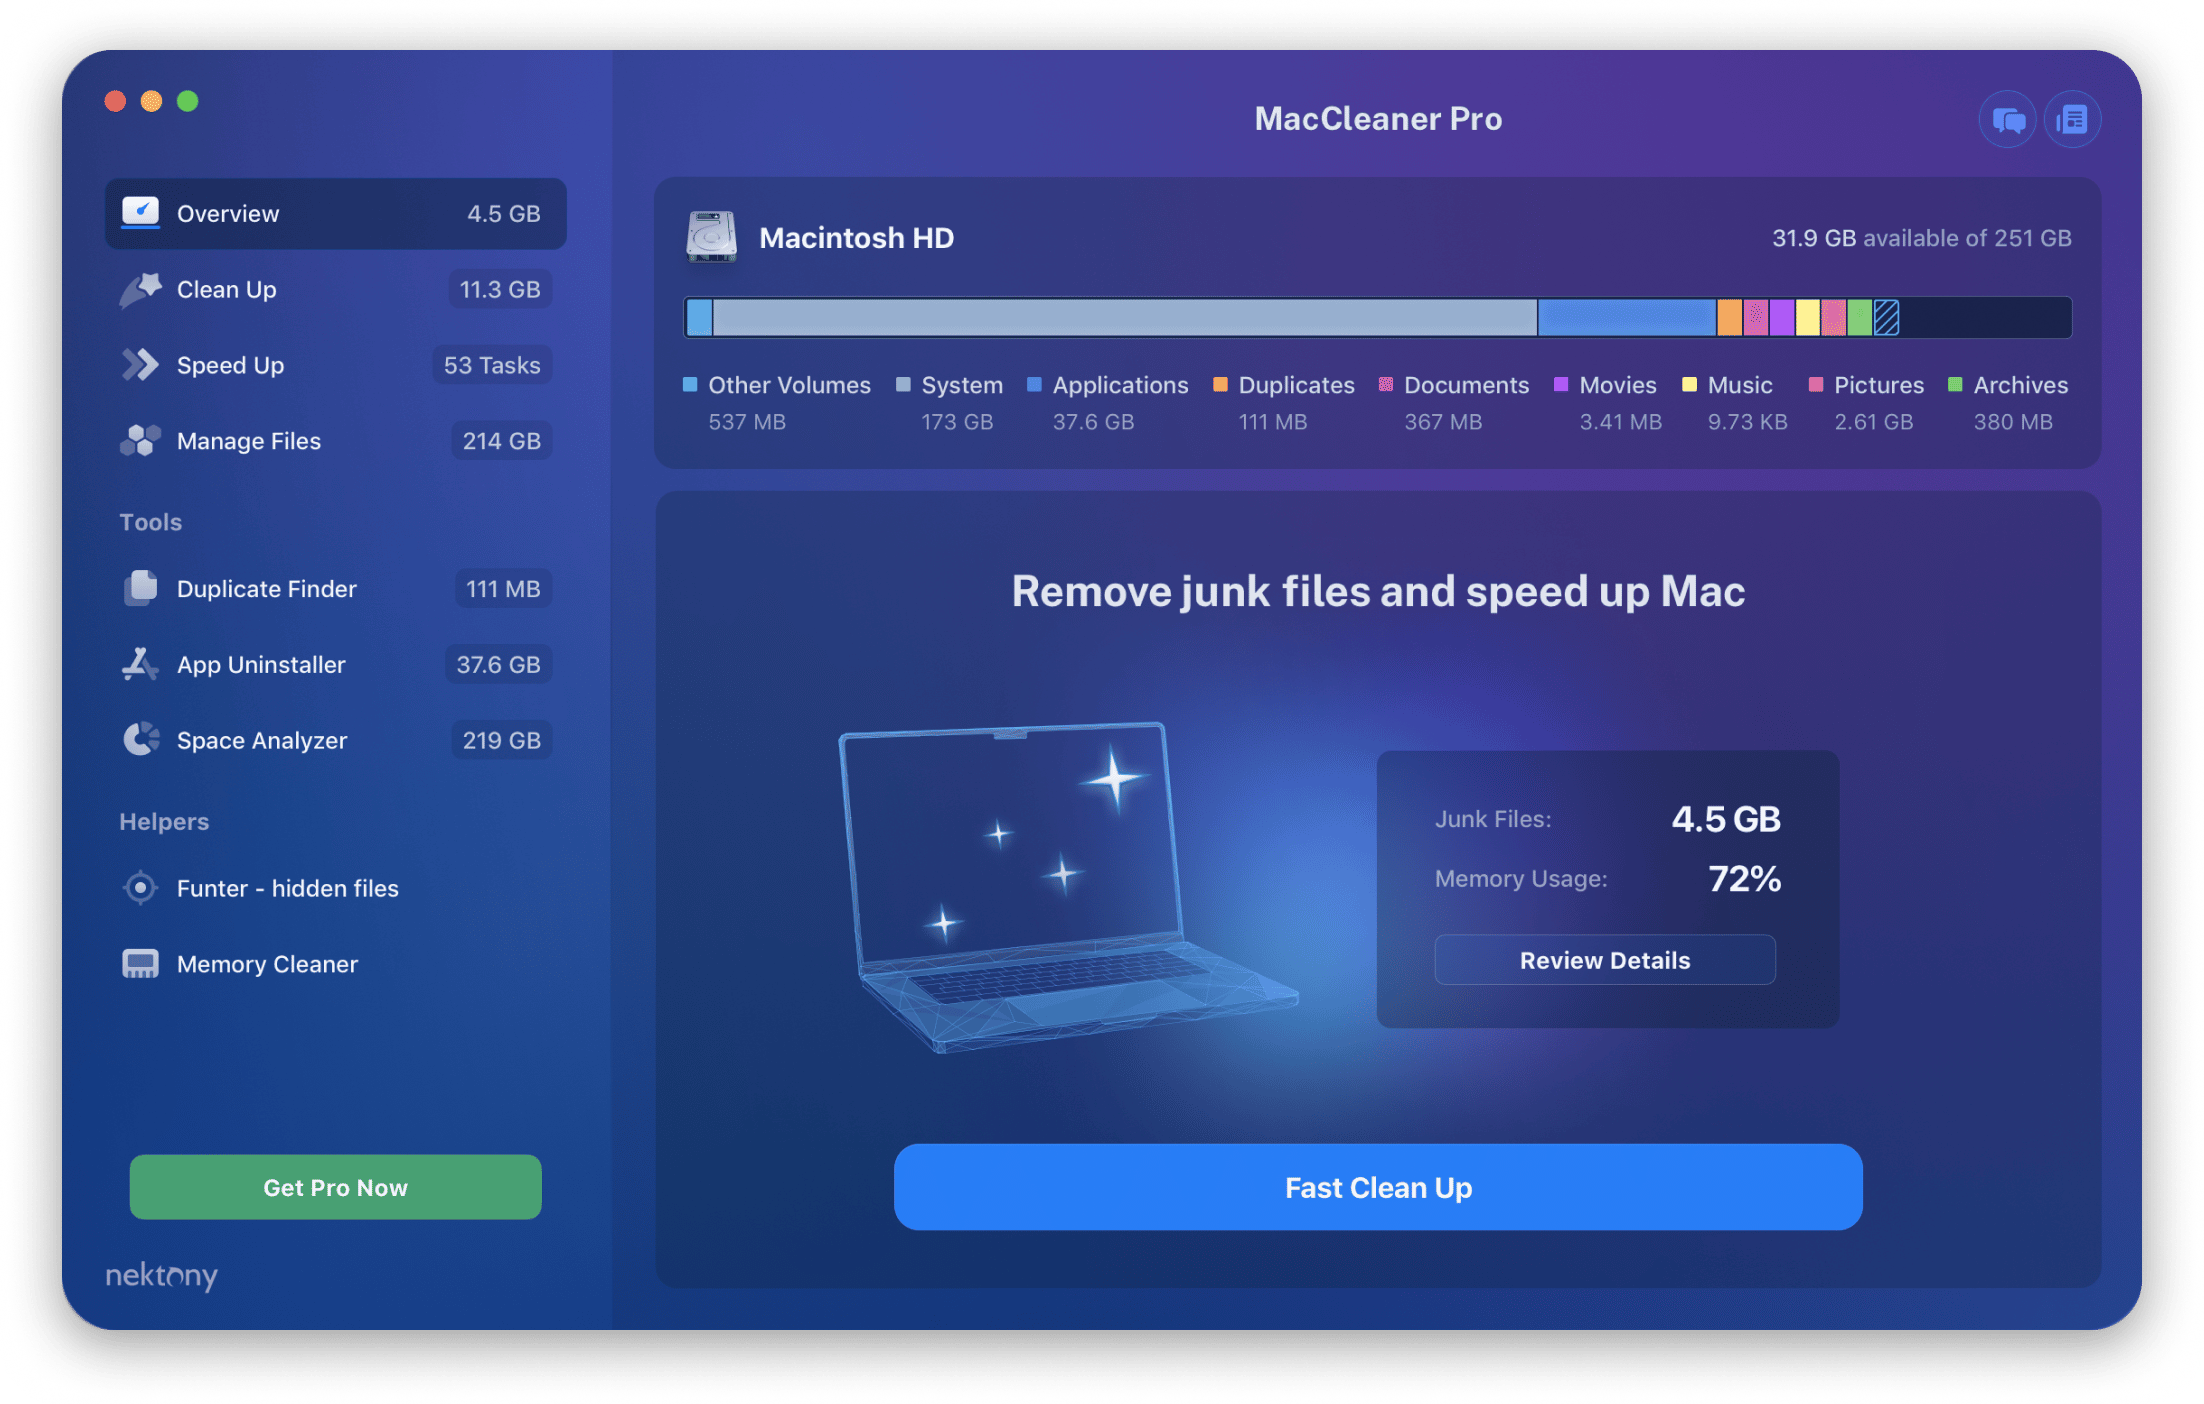 MacCleaner Pro showing Overview window